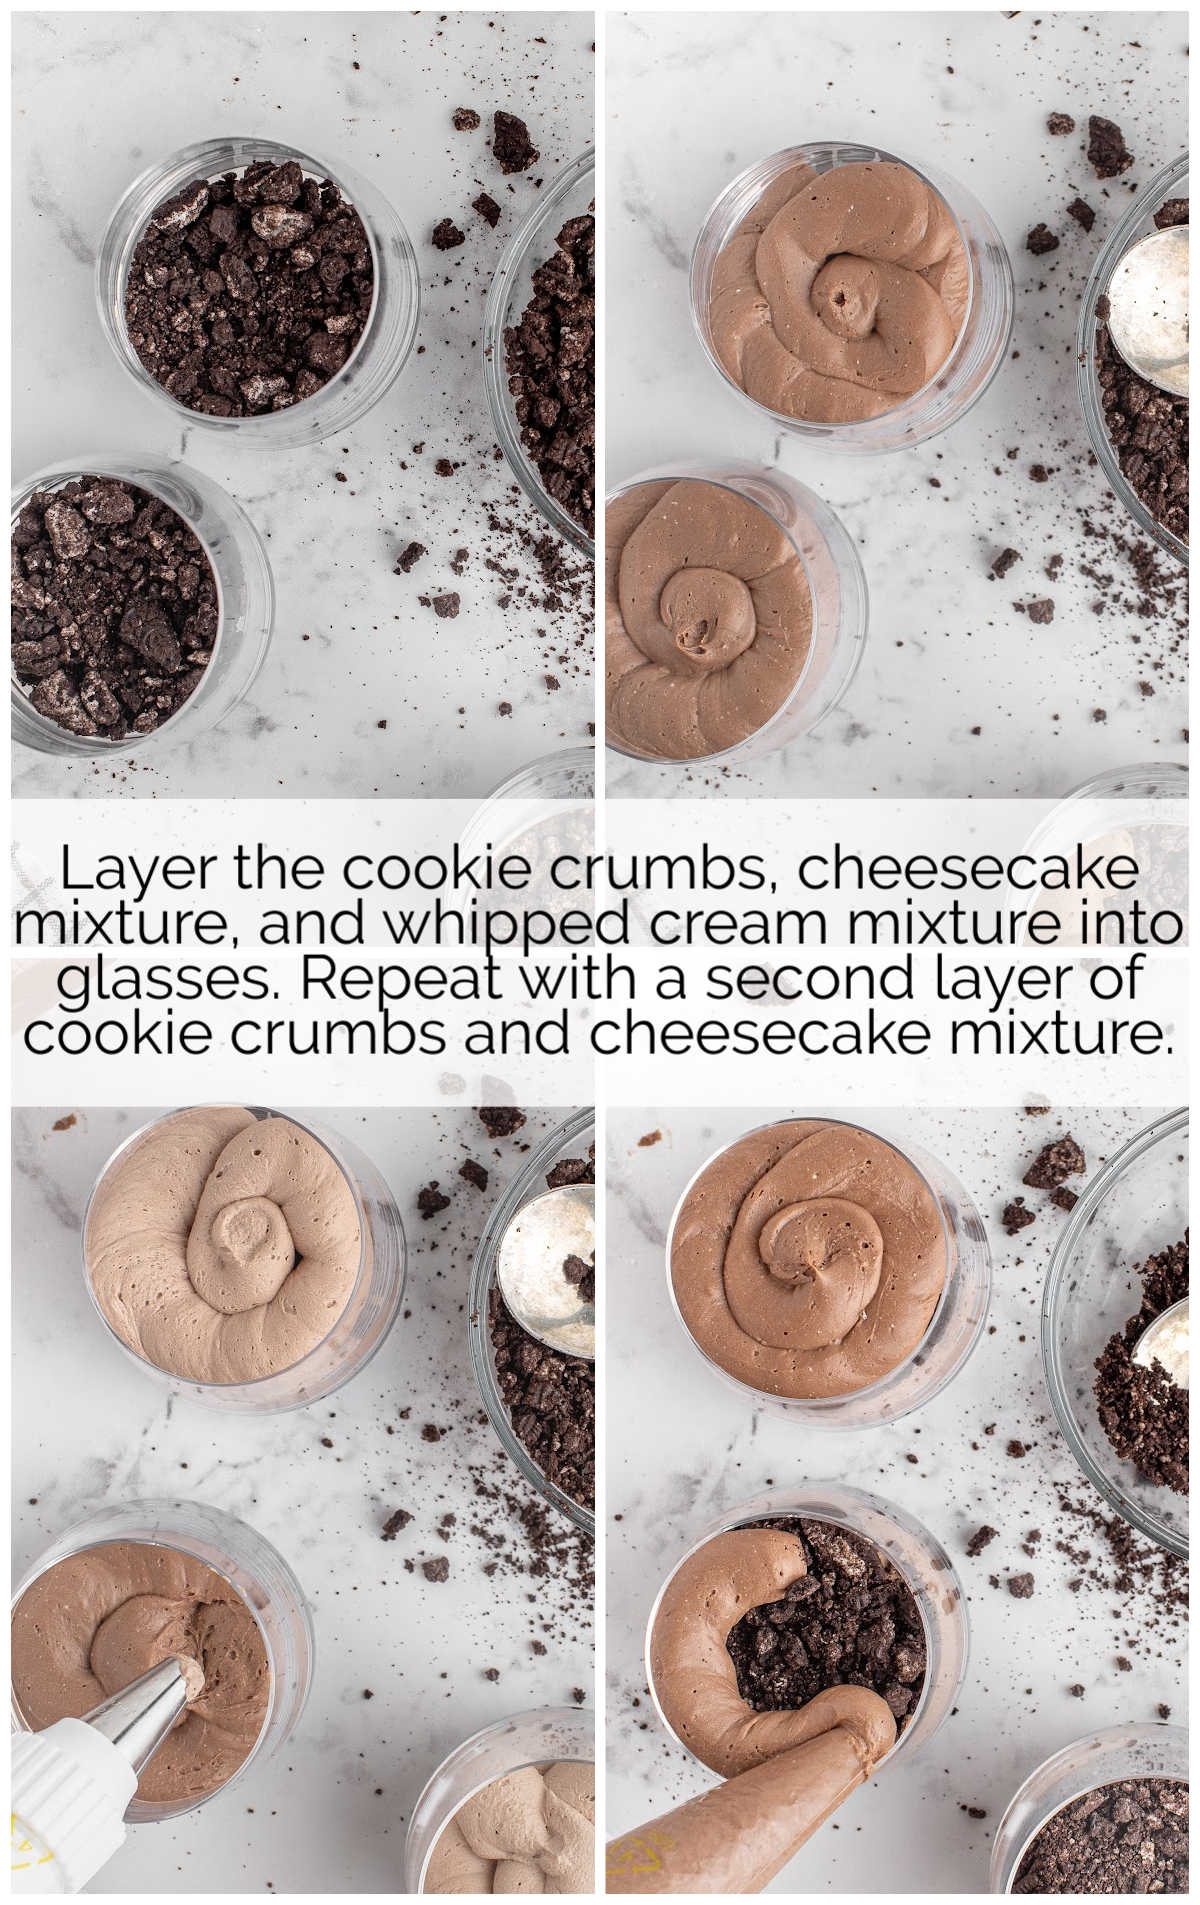 cookies crumbs, cheesecake mixture, and whipped cream mixed together in a glass